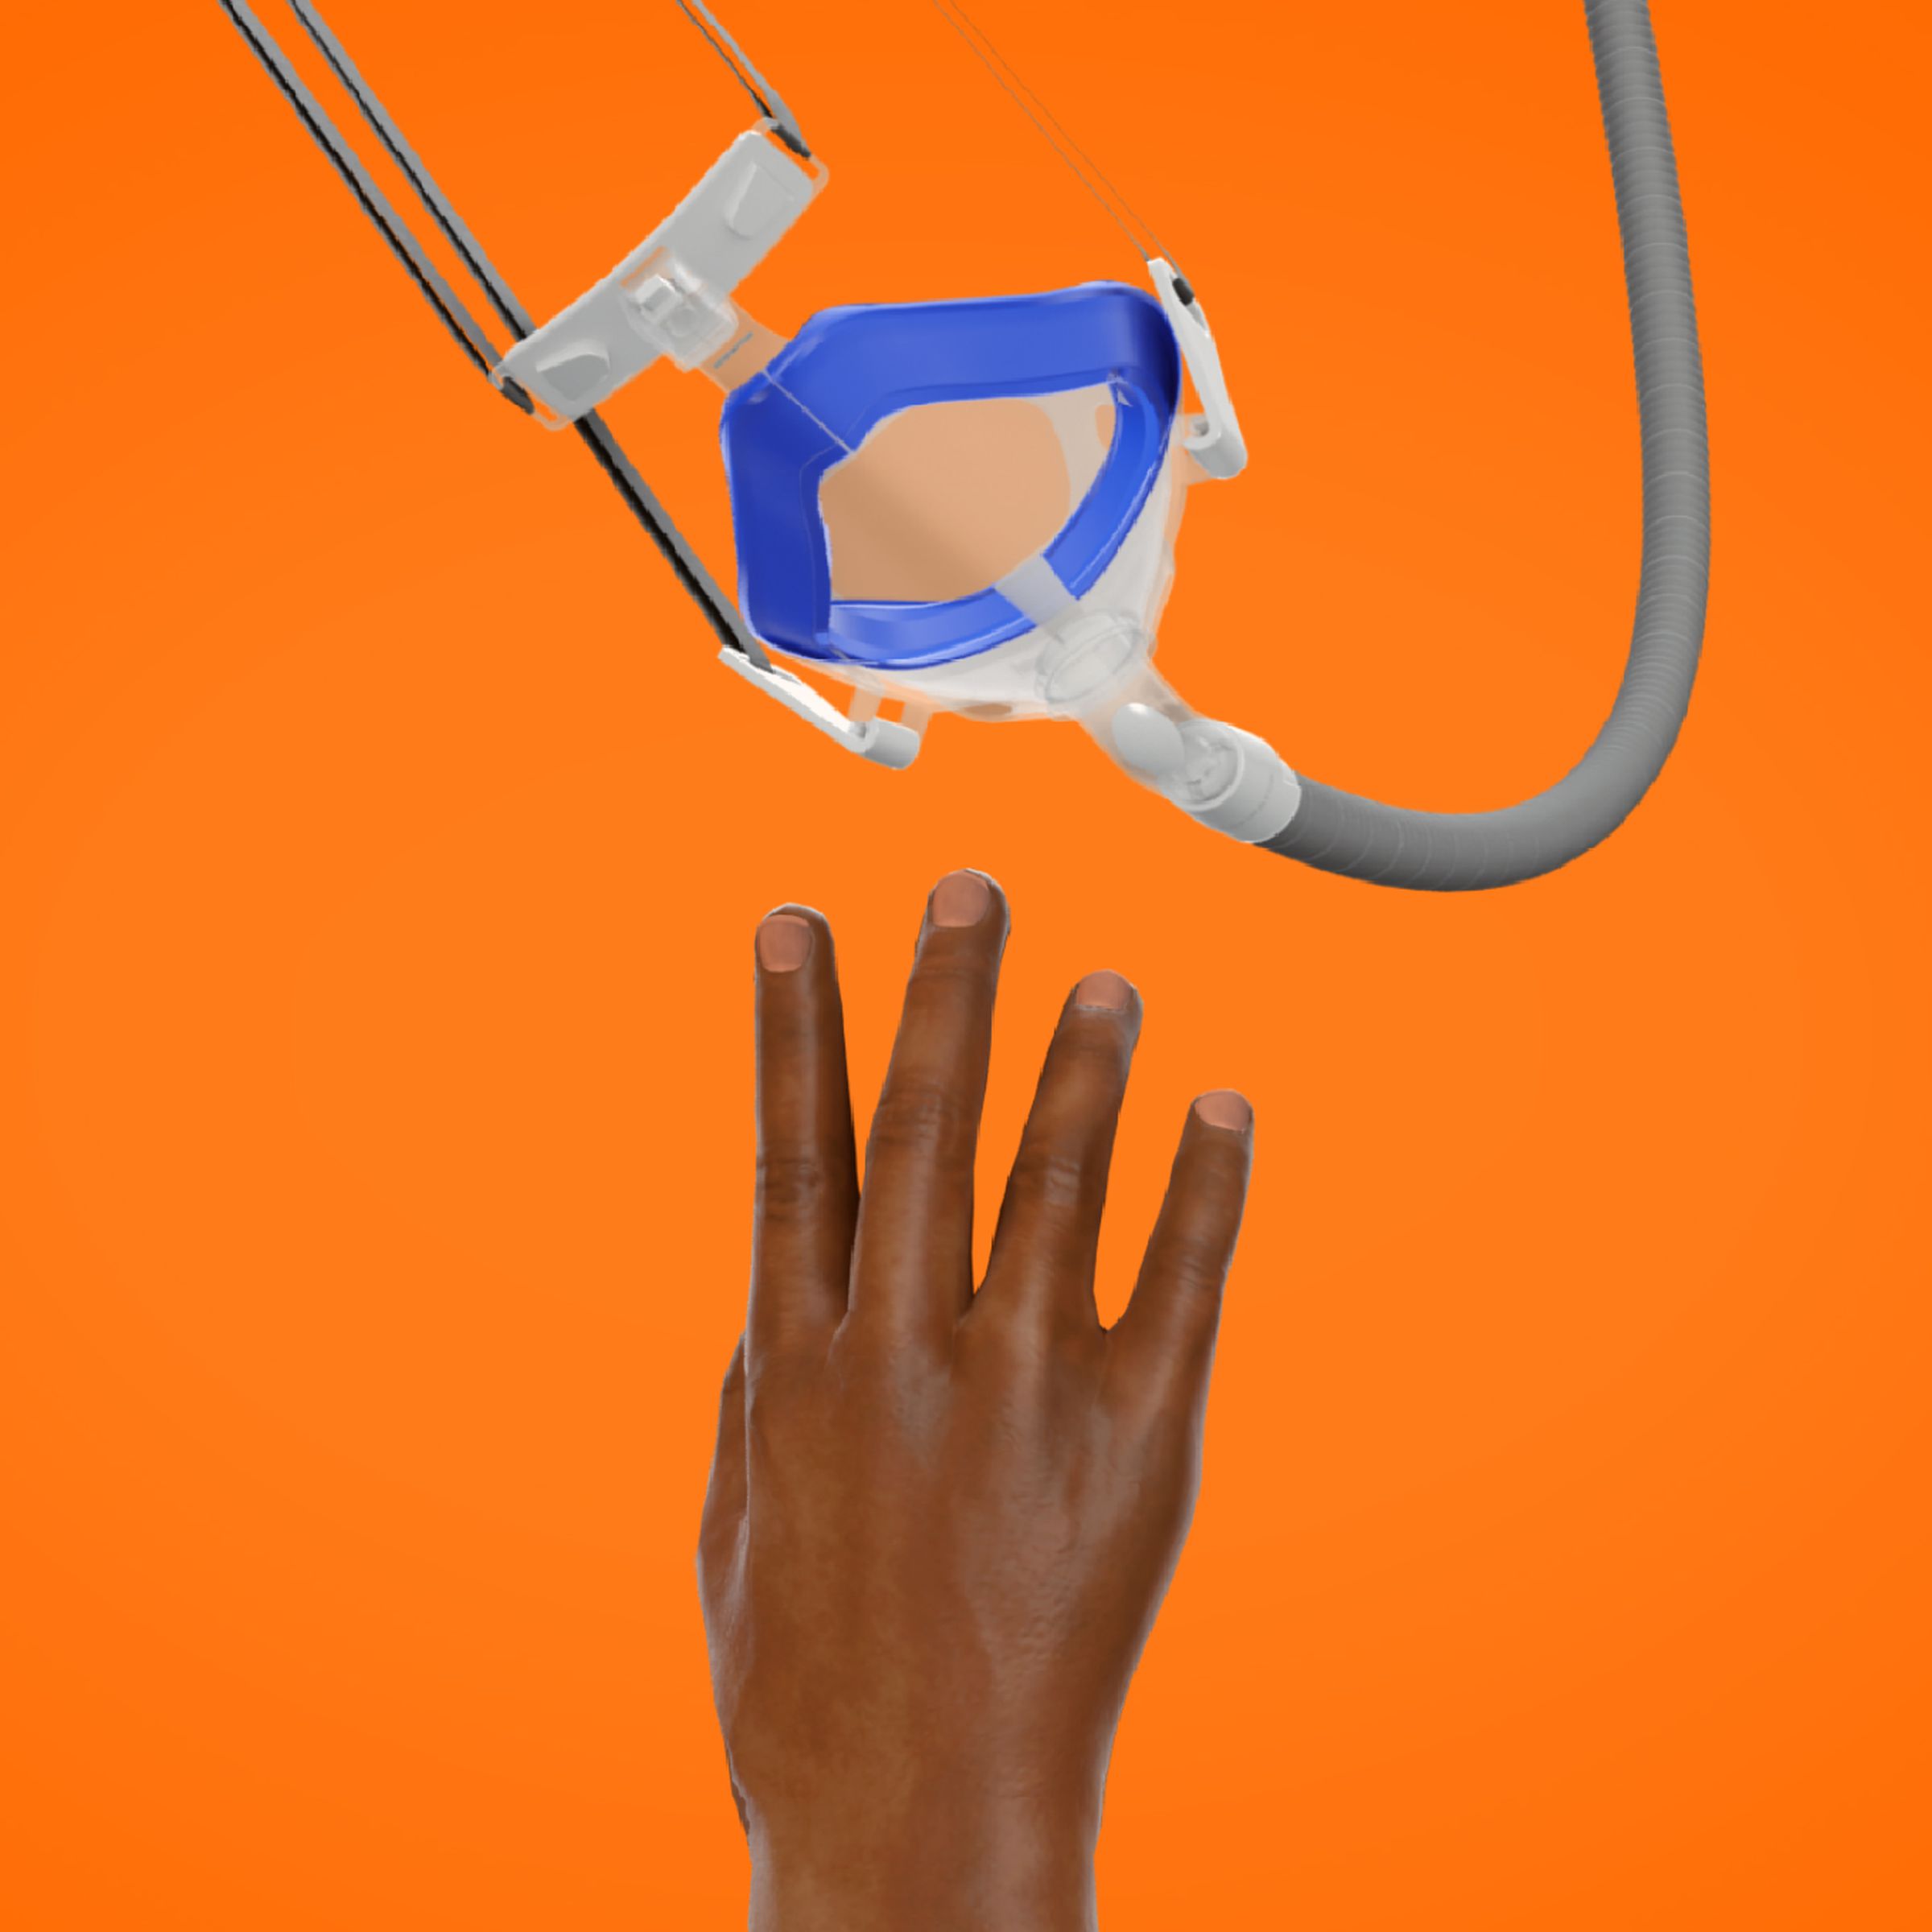 Illustration of hand reaching to grab a CPAP mask that is dangling out of reach.&nbsp;